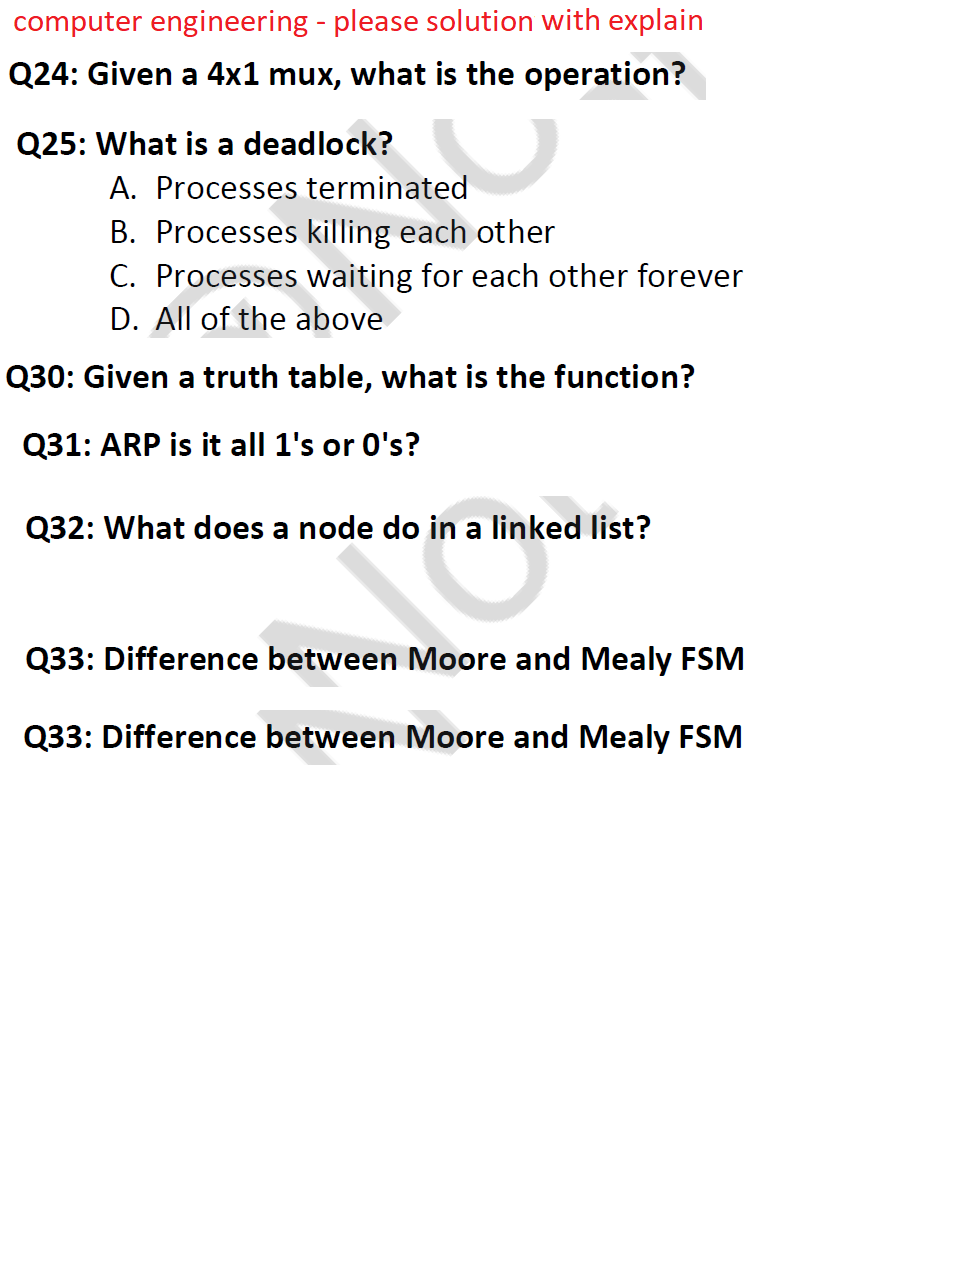 computer engineering - please solution with explain
Q24: Given a 4x1 mux, what is the operation?
Q25: What is a deadlock?
A. Processes terminated
B. Processes killing each other
C. Processes waiting for each other forever
D. All of the above
Q30: Given a truth table, what is the function?
Q31: ARP is it all 1's or 0's?
Q32: What does a node do in a linked list?
Q33: Difference between Moore and Mealy FSM
Q33: Difference between Moore and Mealy FSM